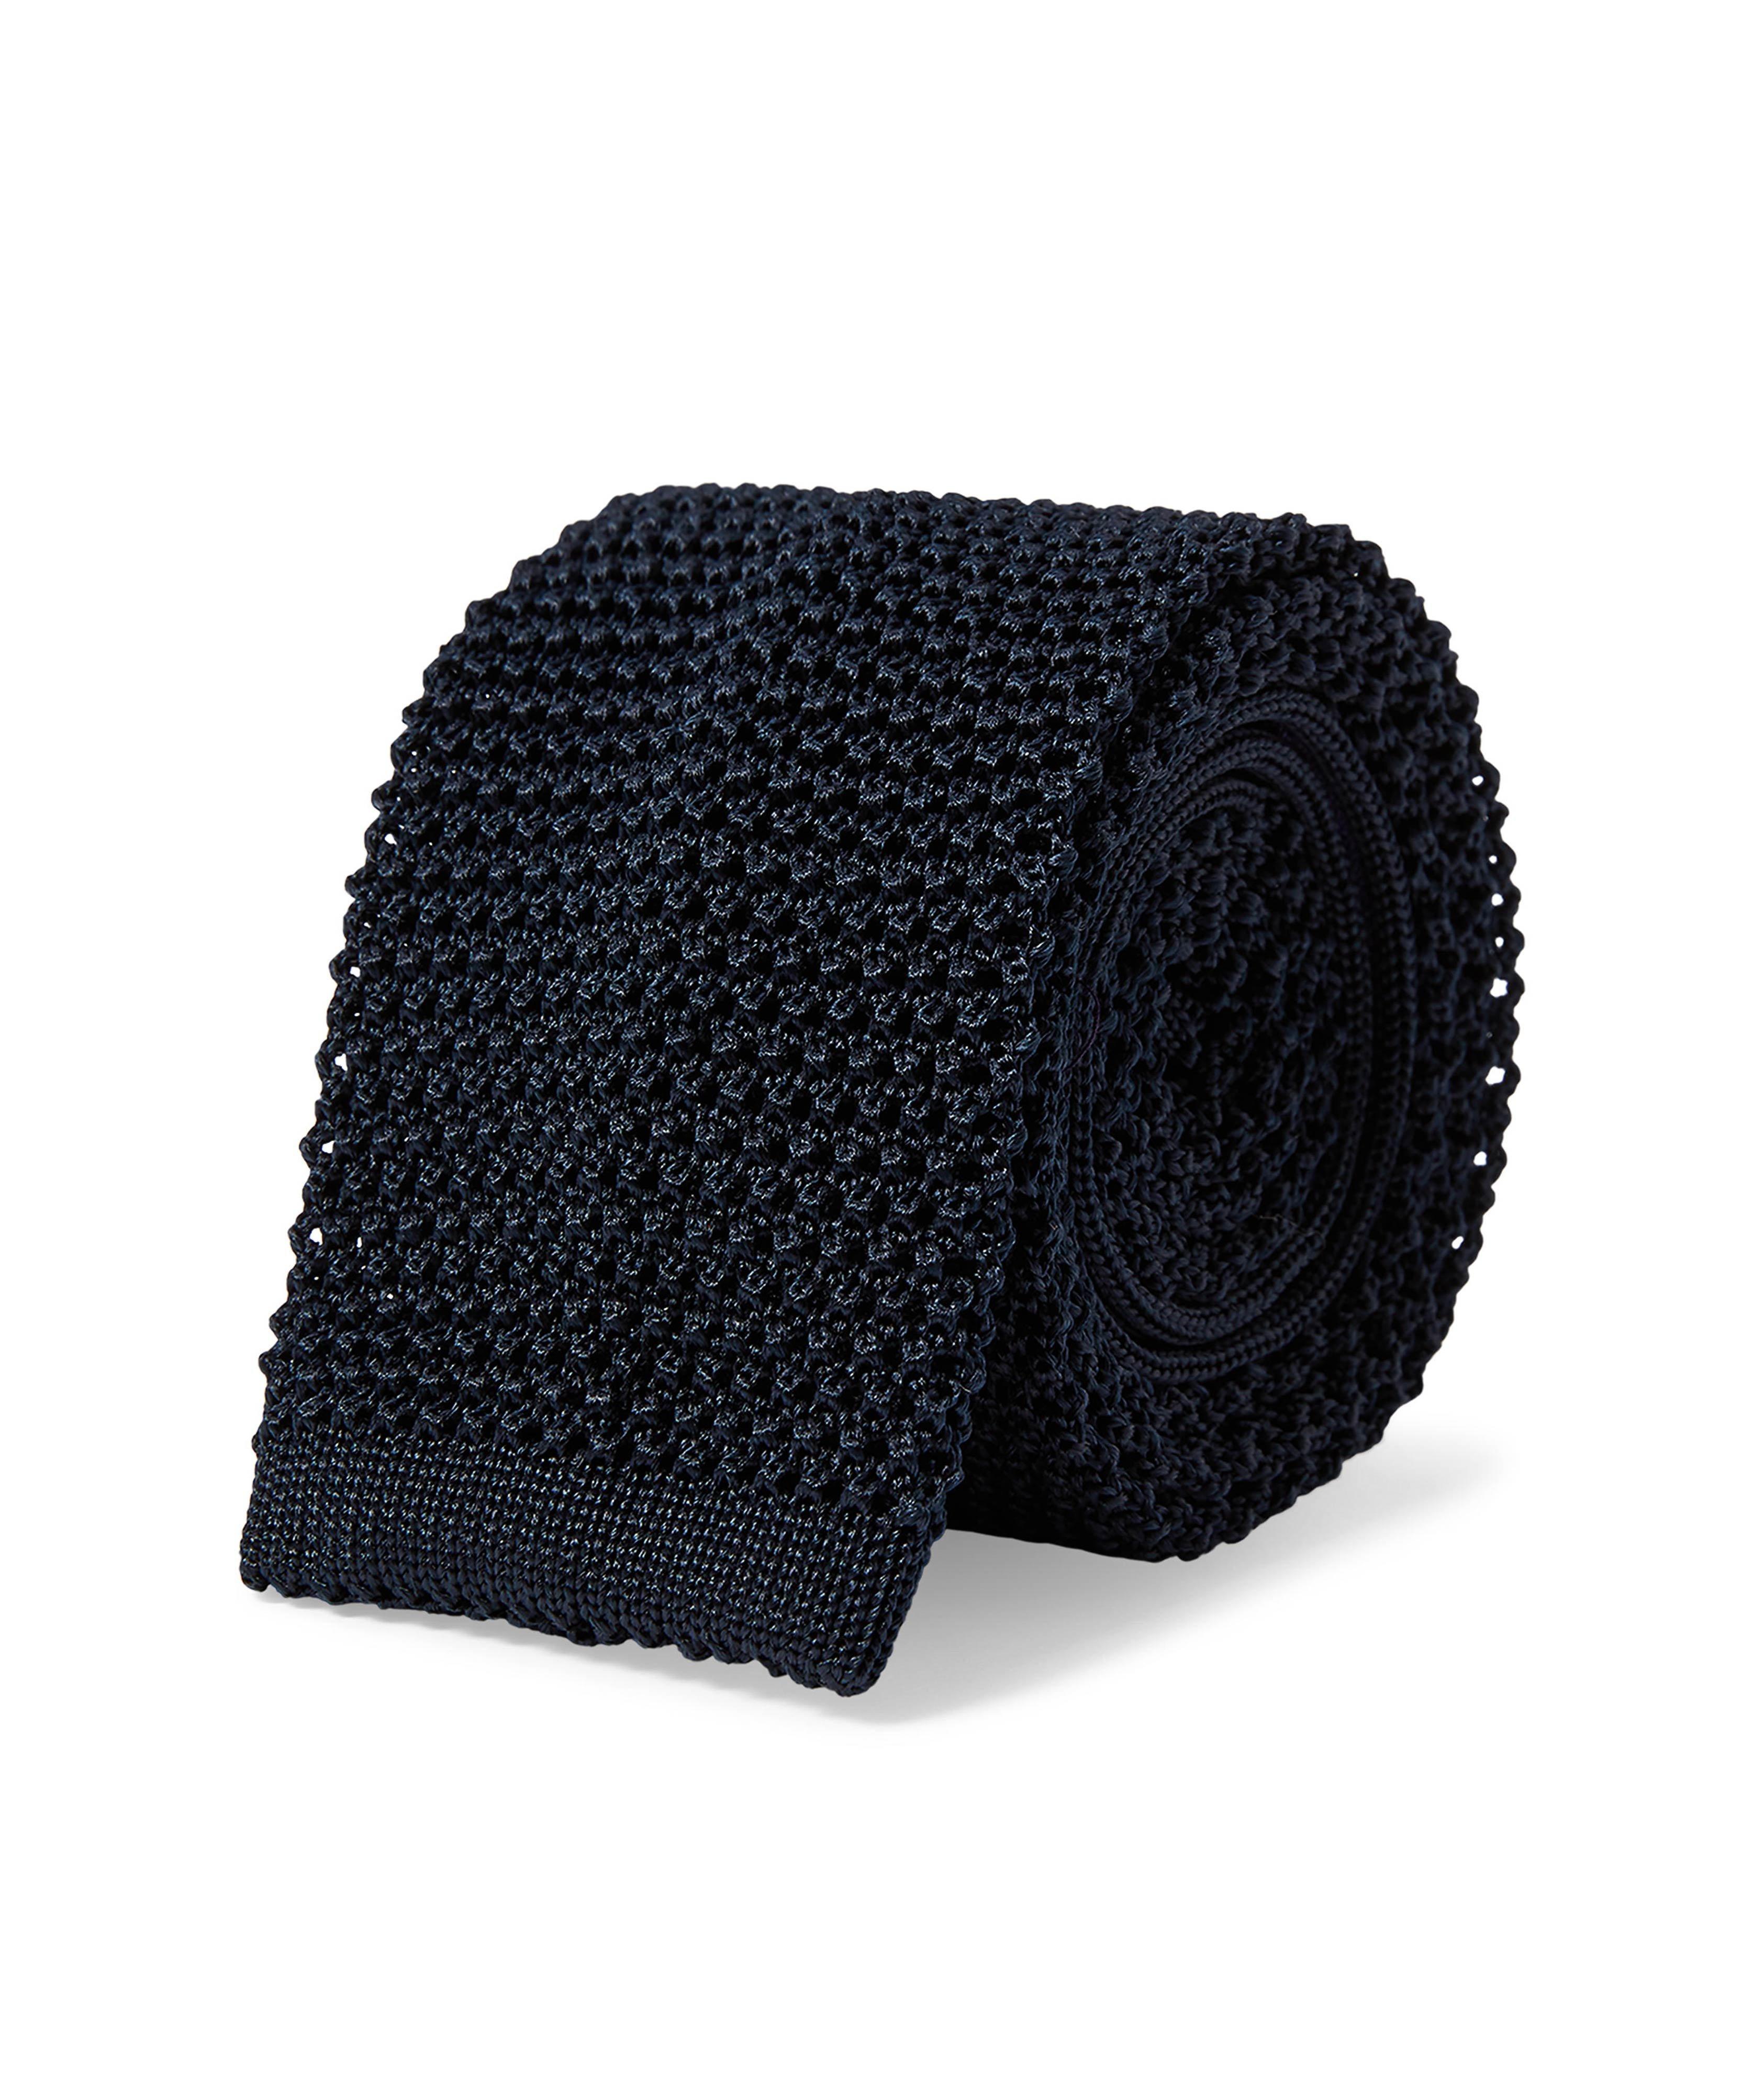 Knitted Silk Tie image 1